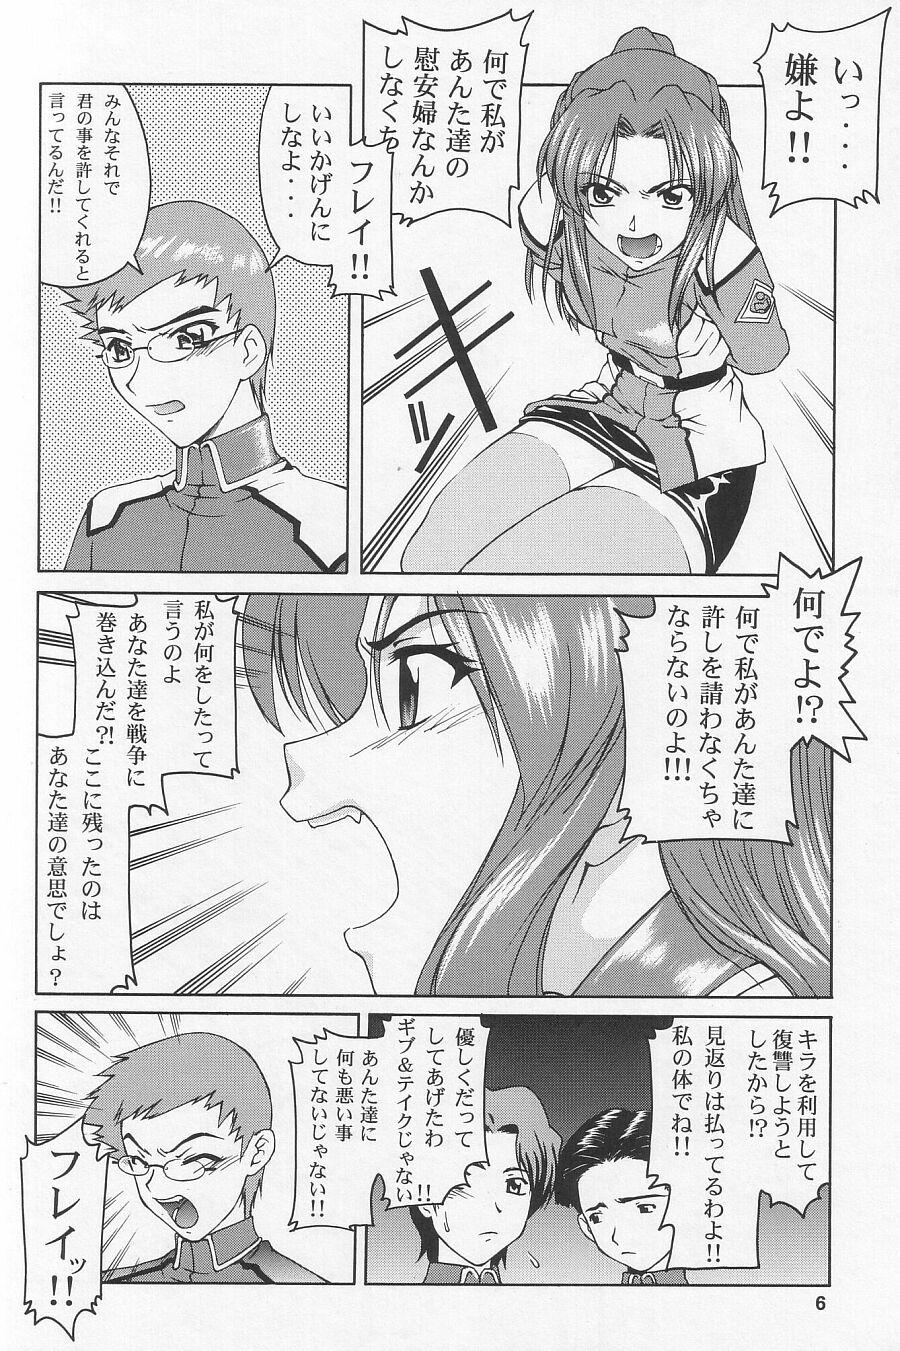 Roleplay Emotion - Gundam seed Foot - Page 6